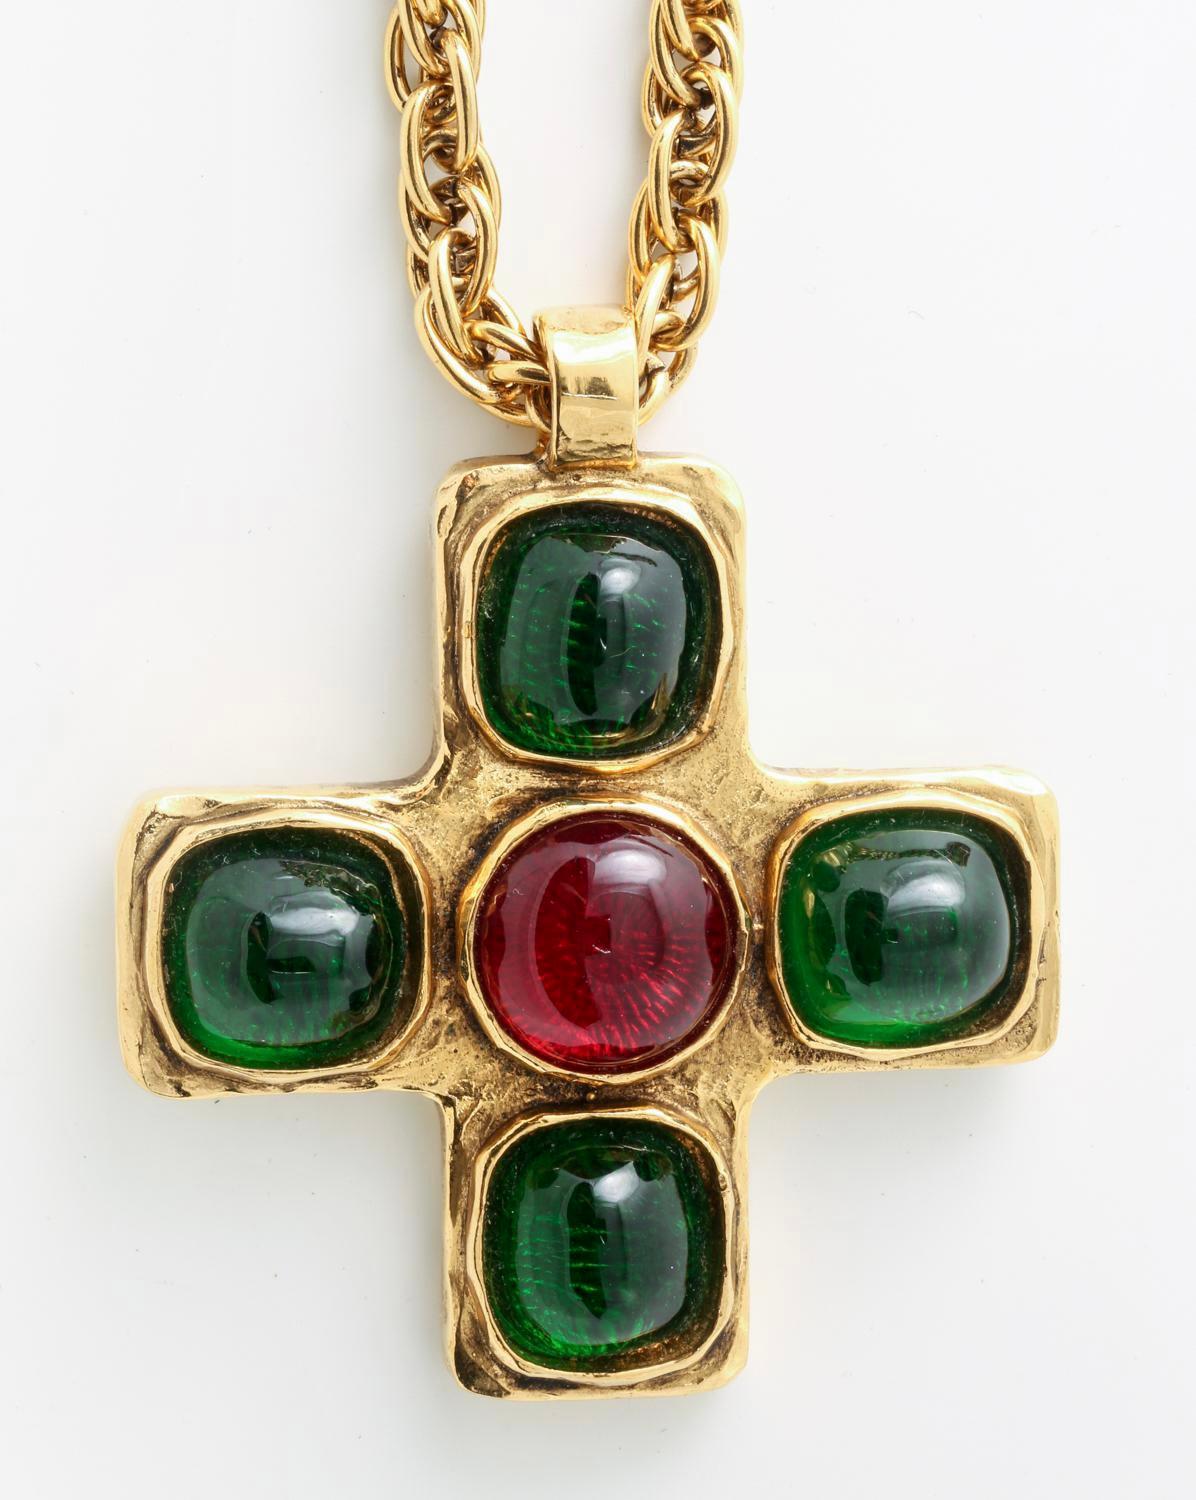 Vintage Chanel Gripoix Glass Cross Necklace, 1982. Green and red glass mounted in gold tone metal; the chain marked 'Chanel 1982' and 'Made in France', the pendant marked 'Chanel Depose' and numbered.
This piece is a real fashion statement. The